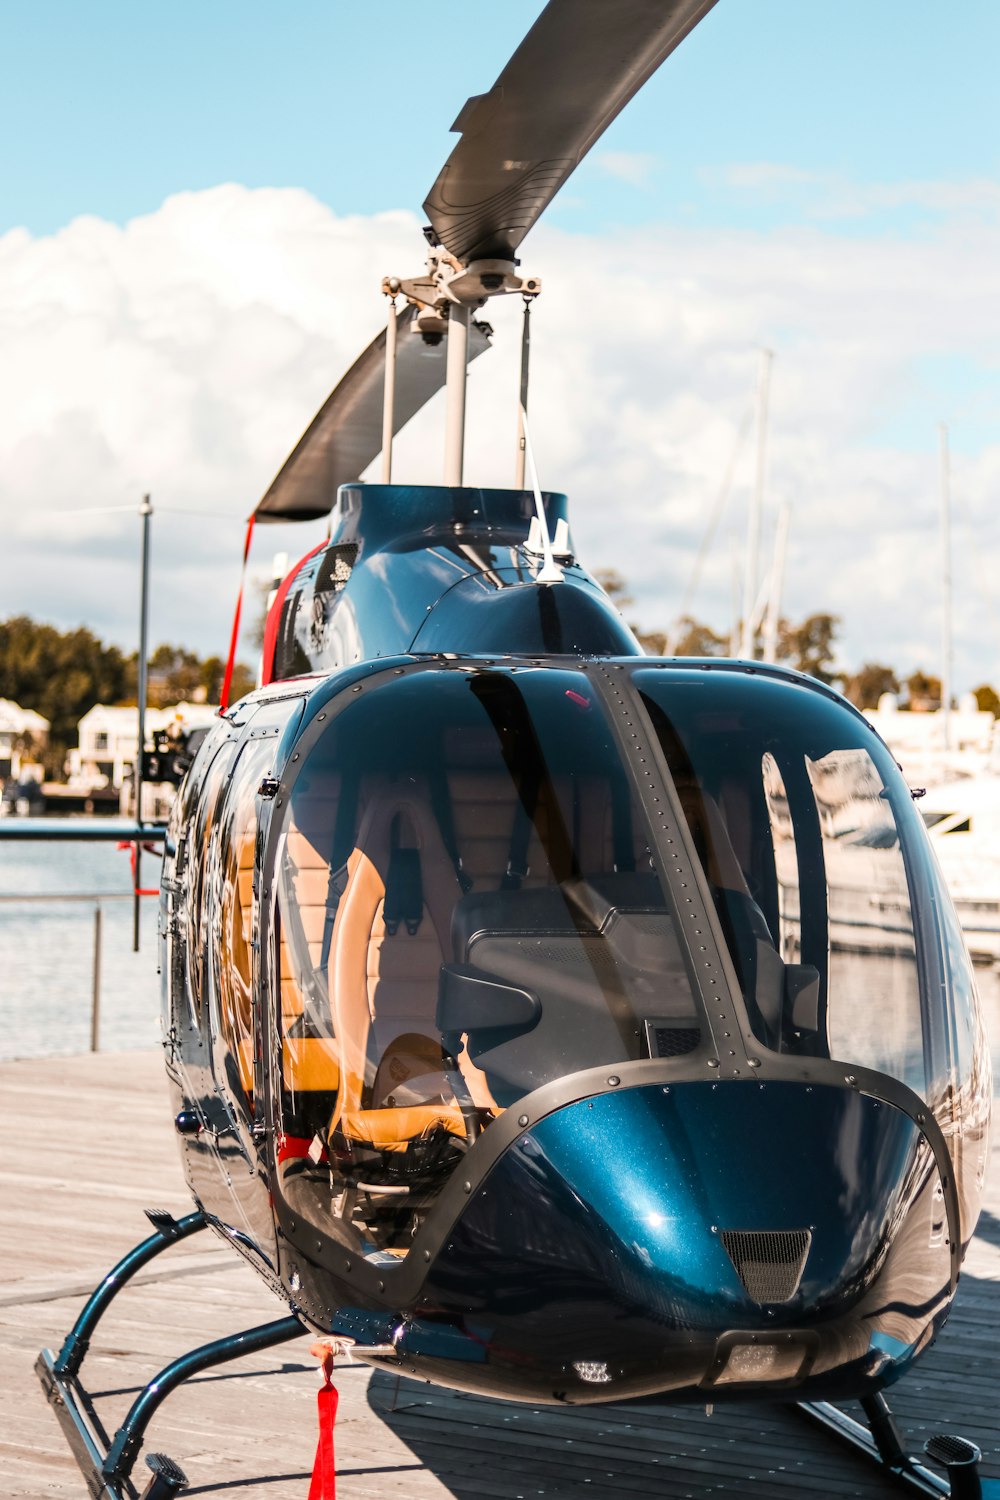 100+ Helicopter Pictures | Download Free Images on Unsplash